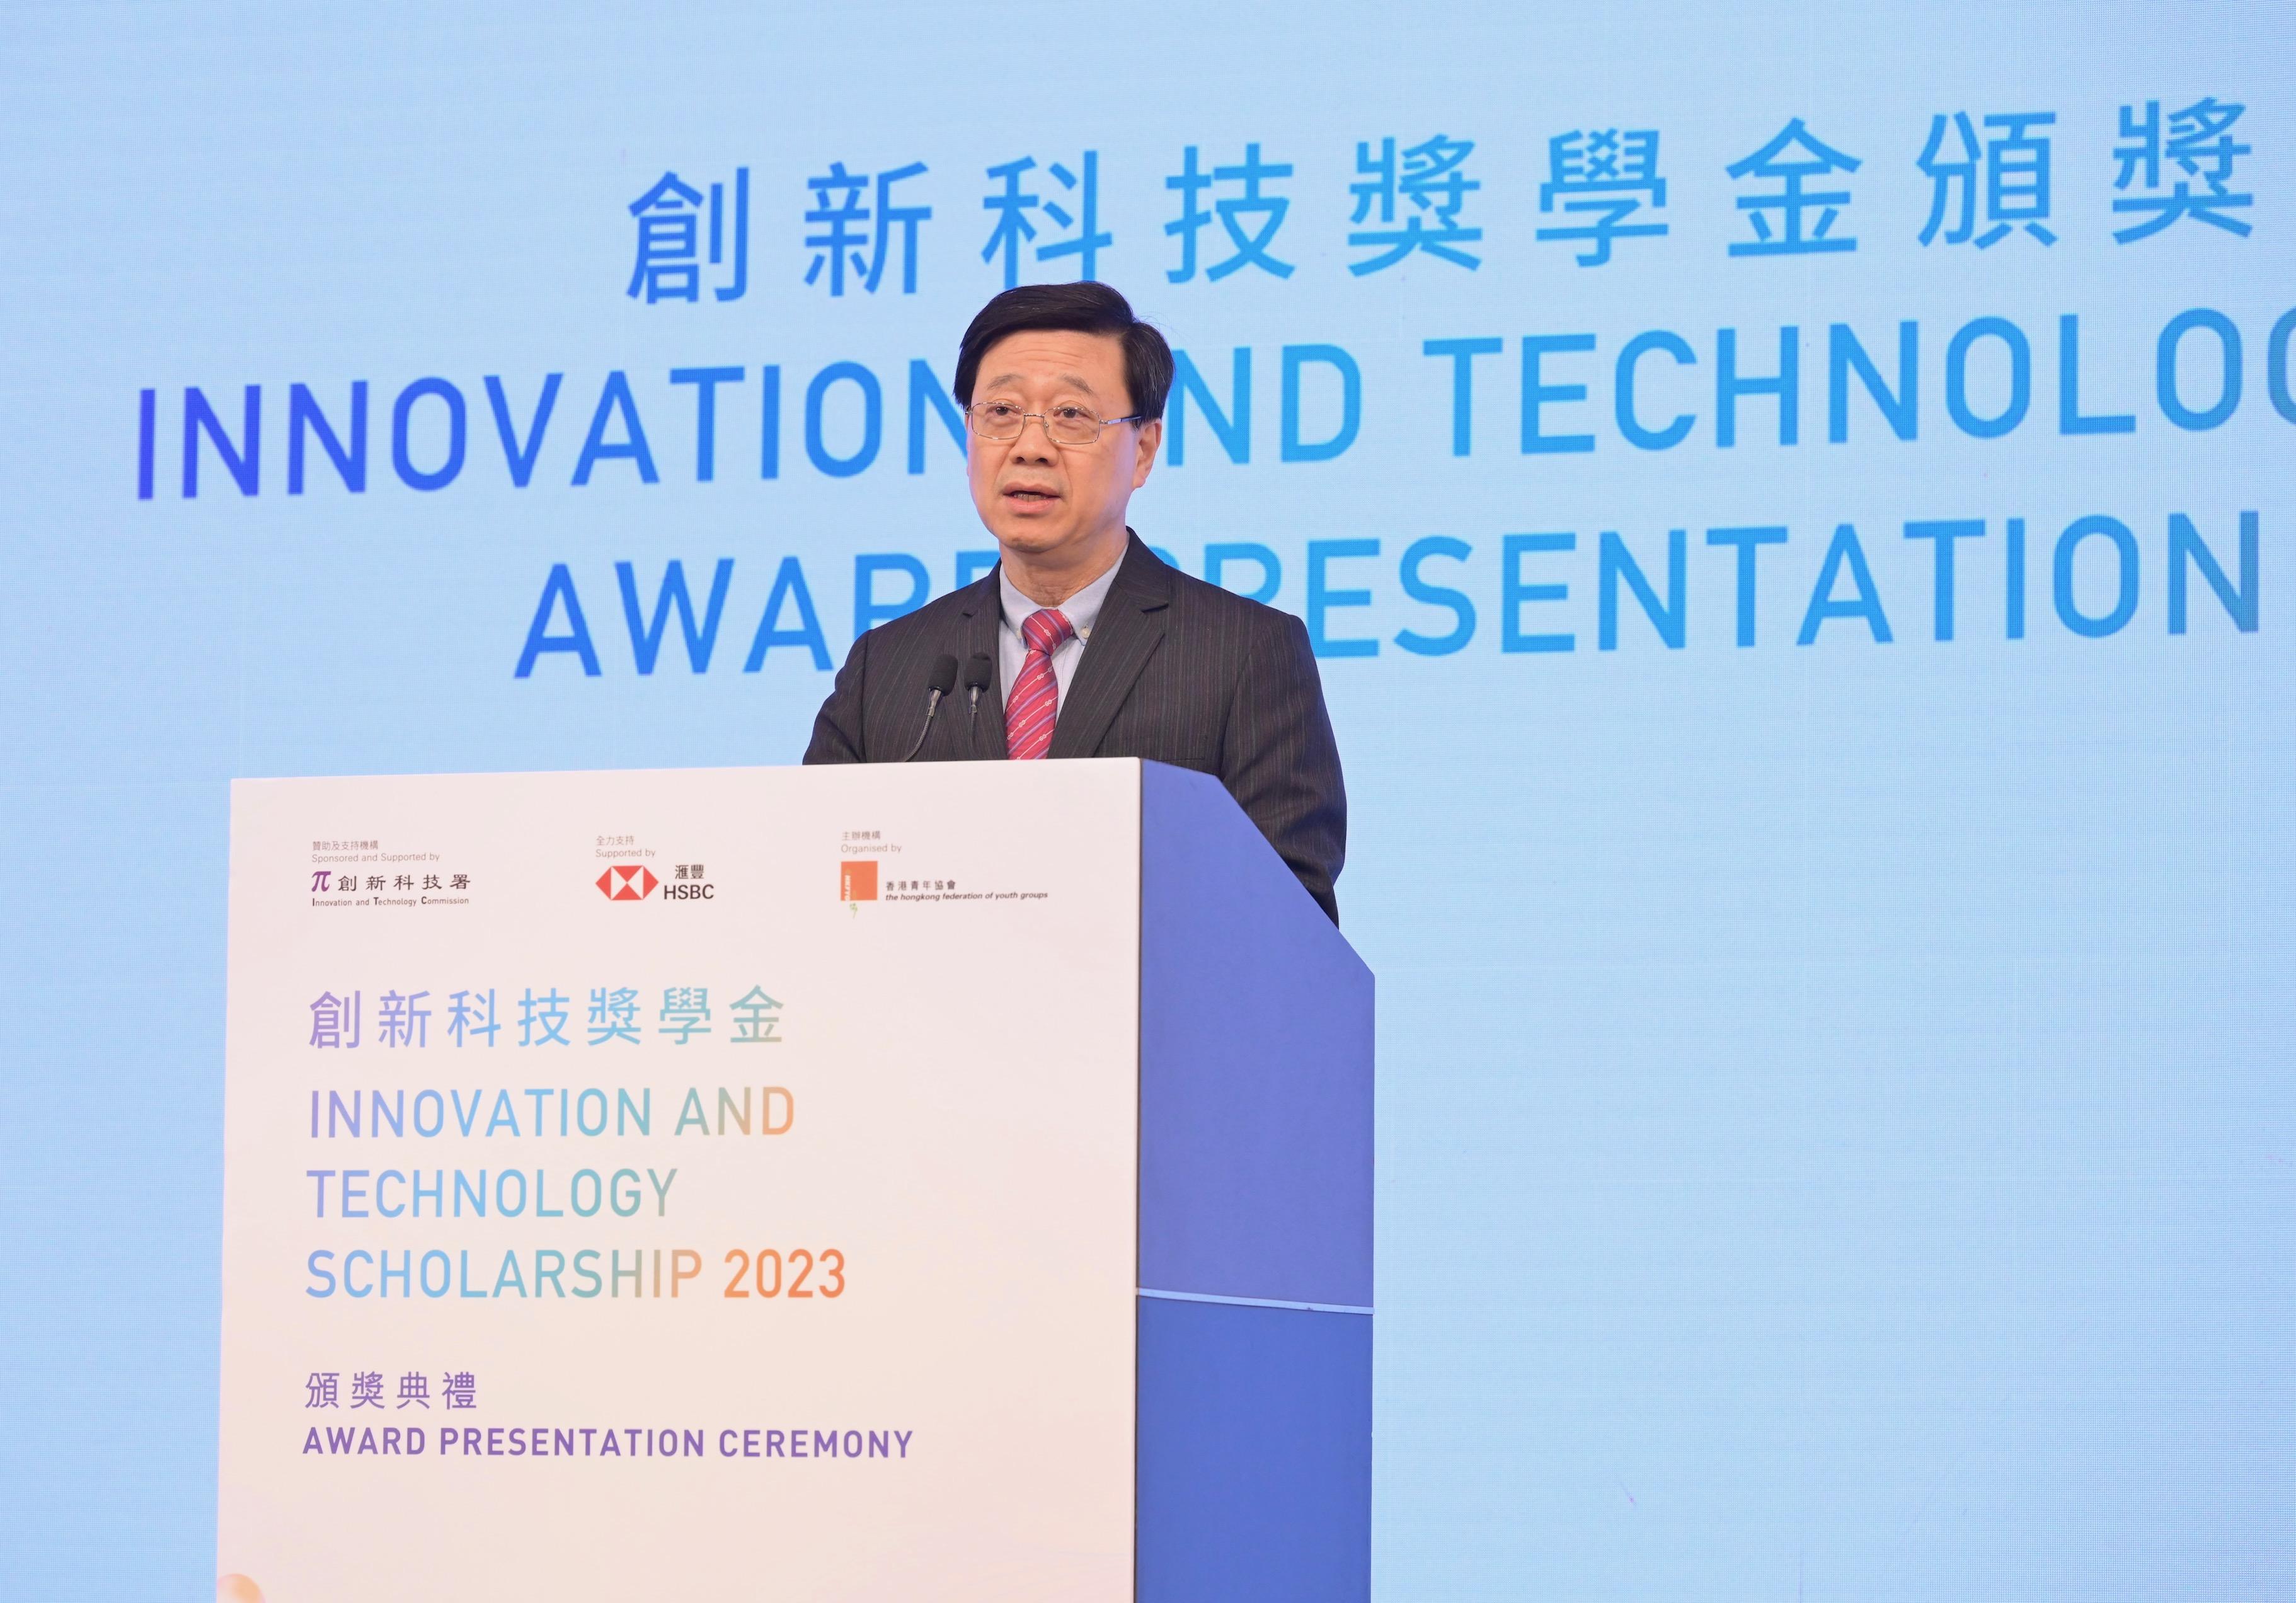 The Chief Executive, Mr John Lee, speaks at the Innovation and Technology Scholarship Award Presentation Ceremony 2023 today (June 13).